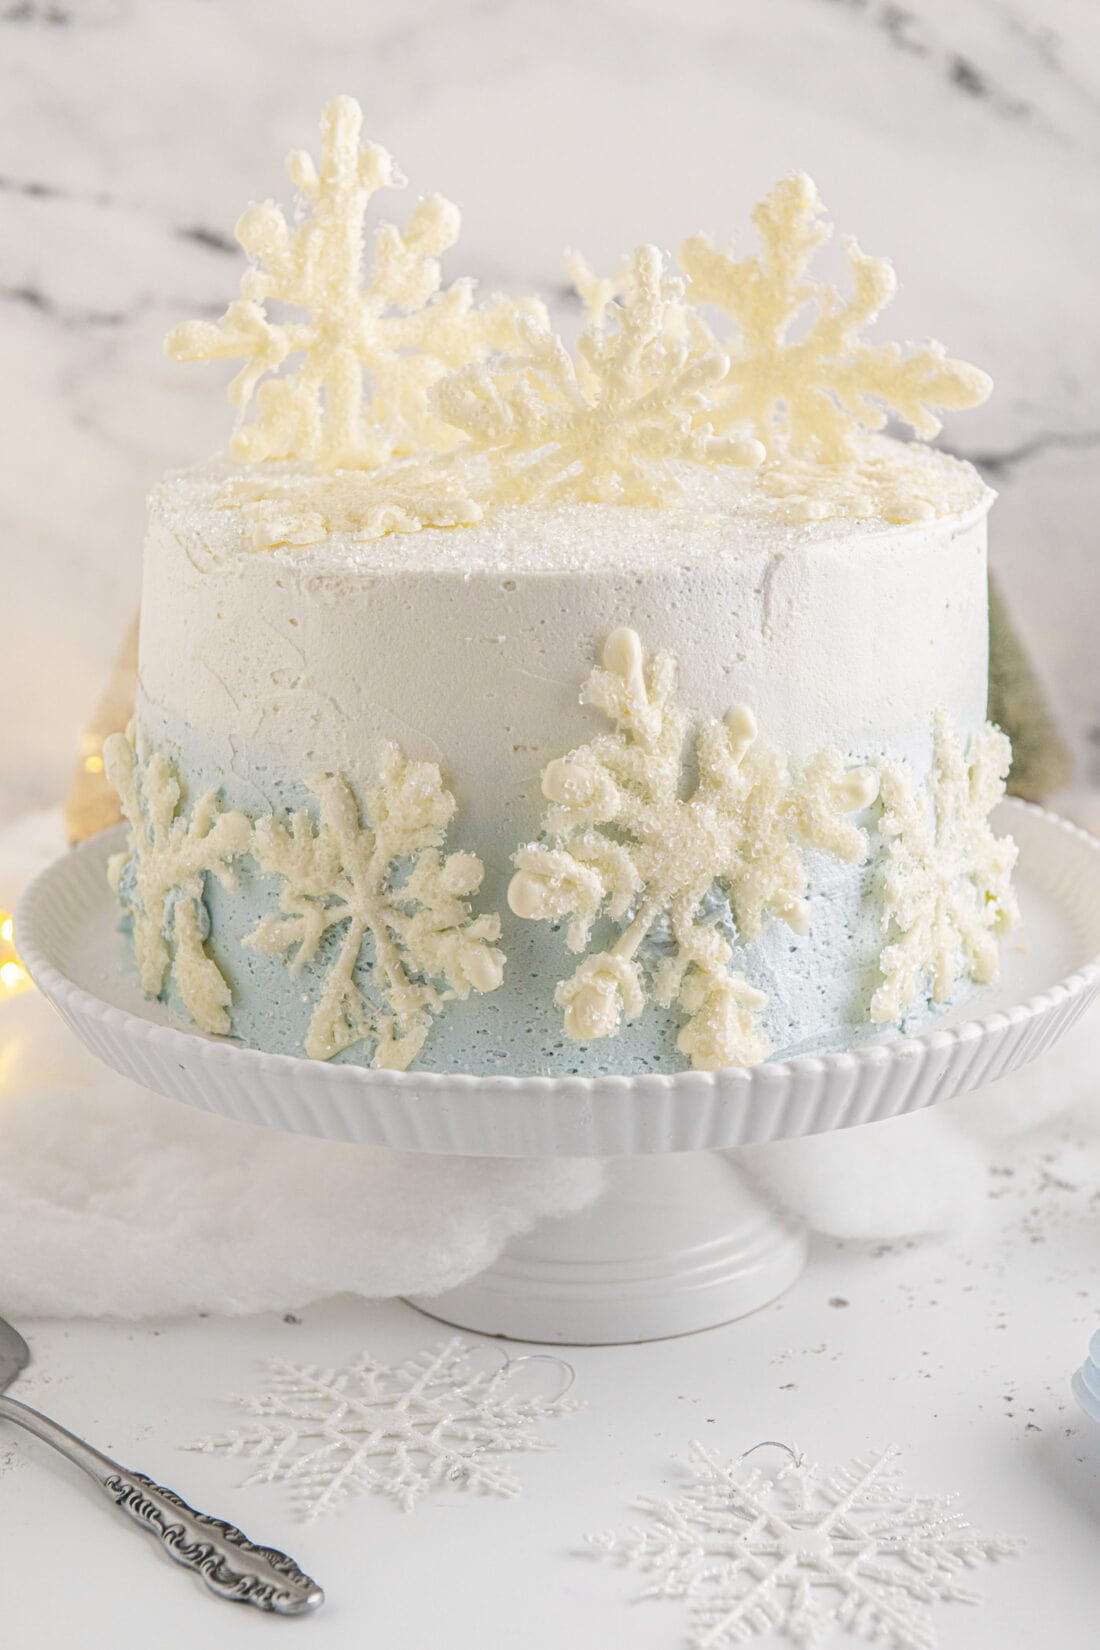 This Naked Cake Is a Winter Wonderland | Craftsy | www.craftsy.com